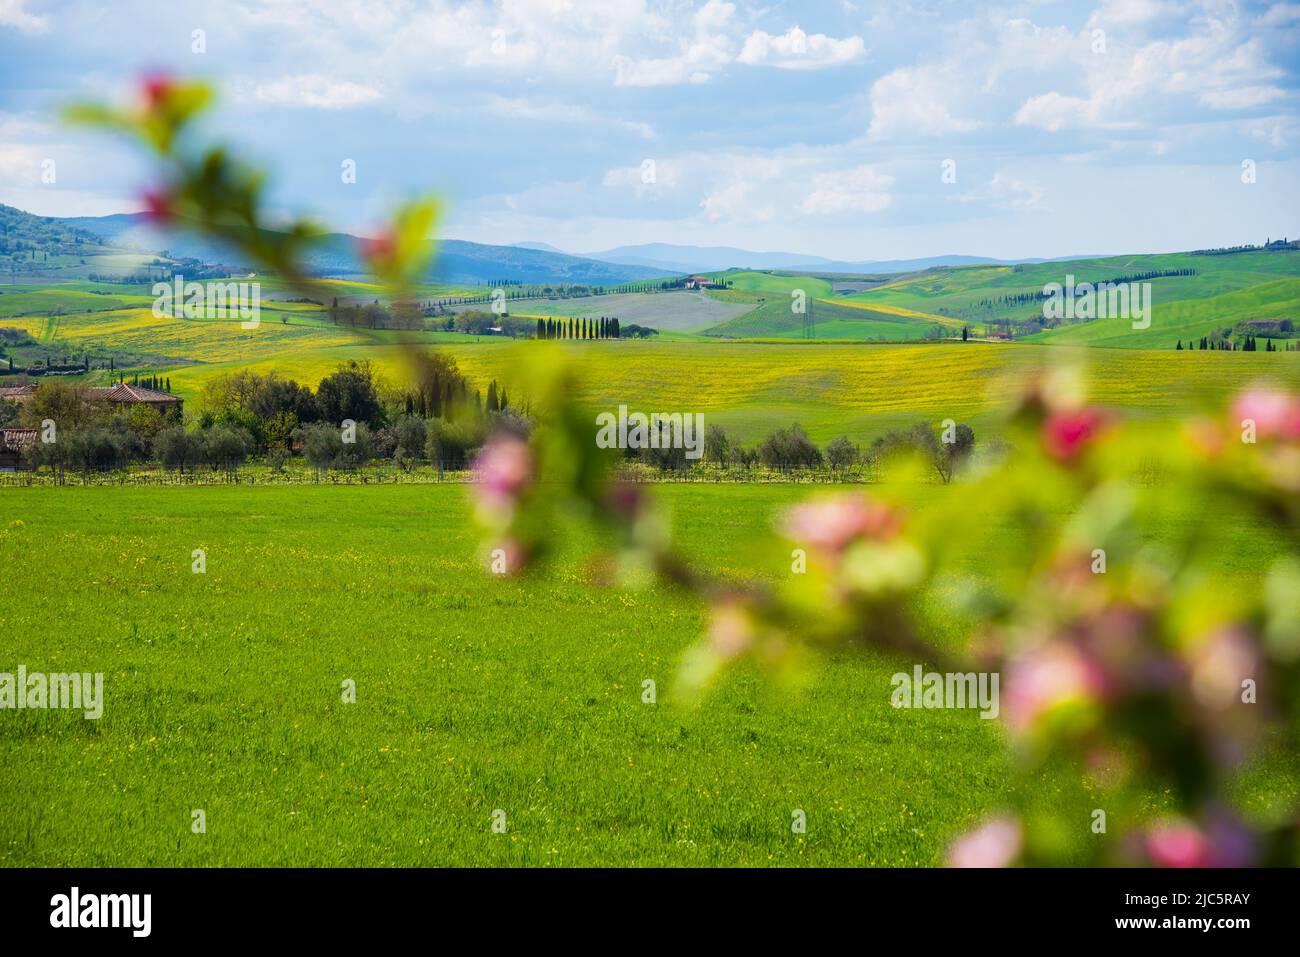 Tuscany, Italy. Val d'Orcia scenic hill landscape panorama with typical farmhouse, cypress trees and rapeseed flowers and blurry cherry tree blossom Stock Photo